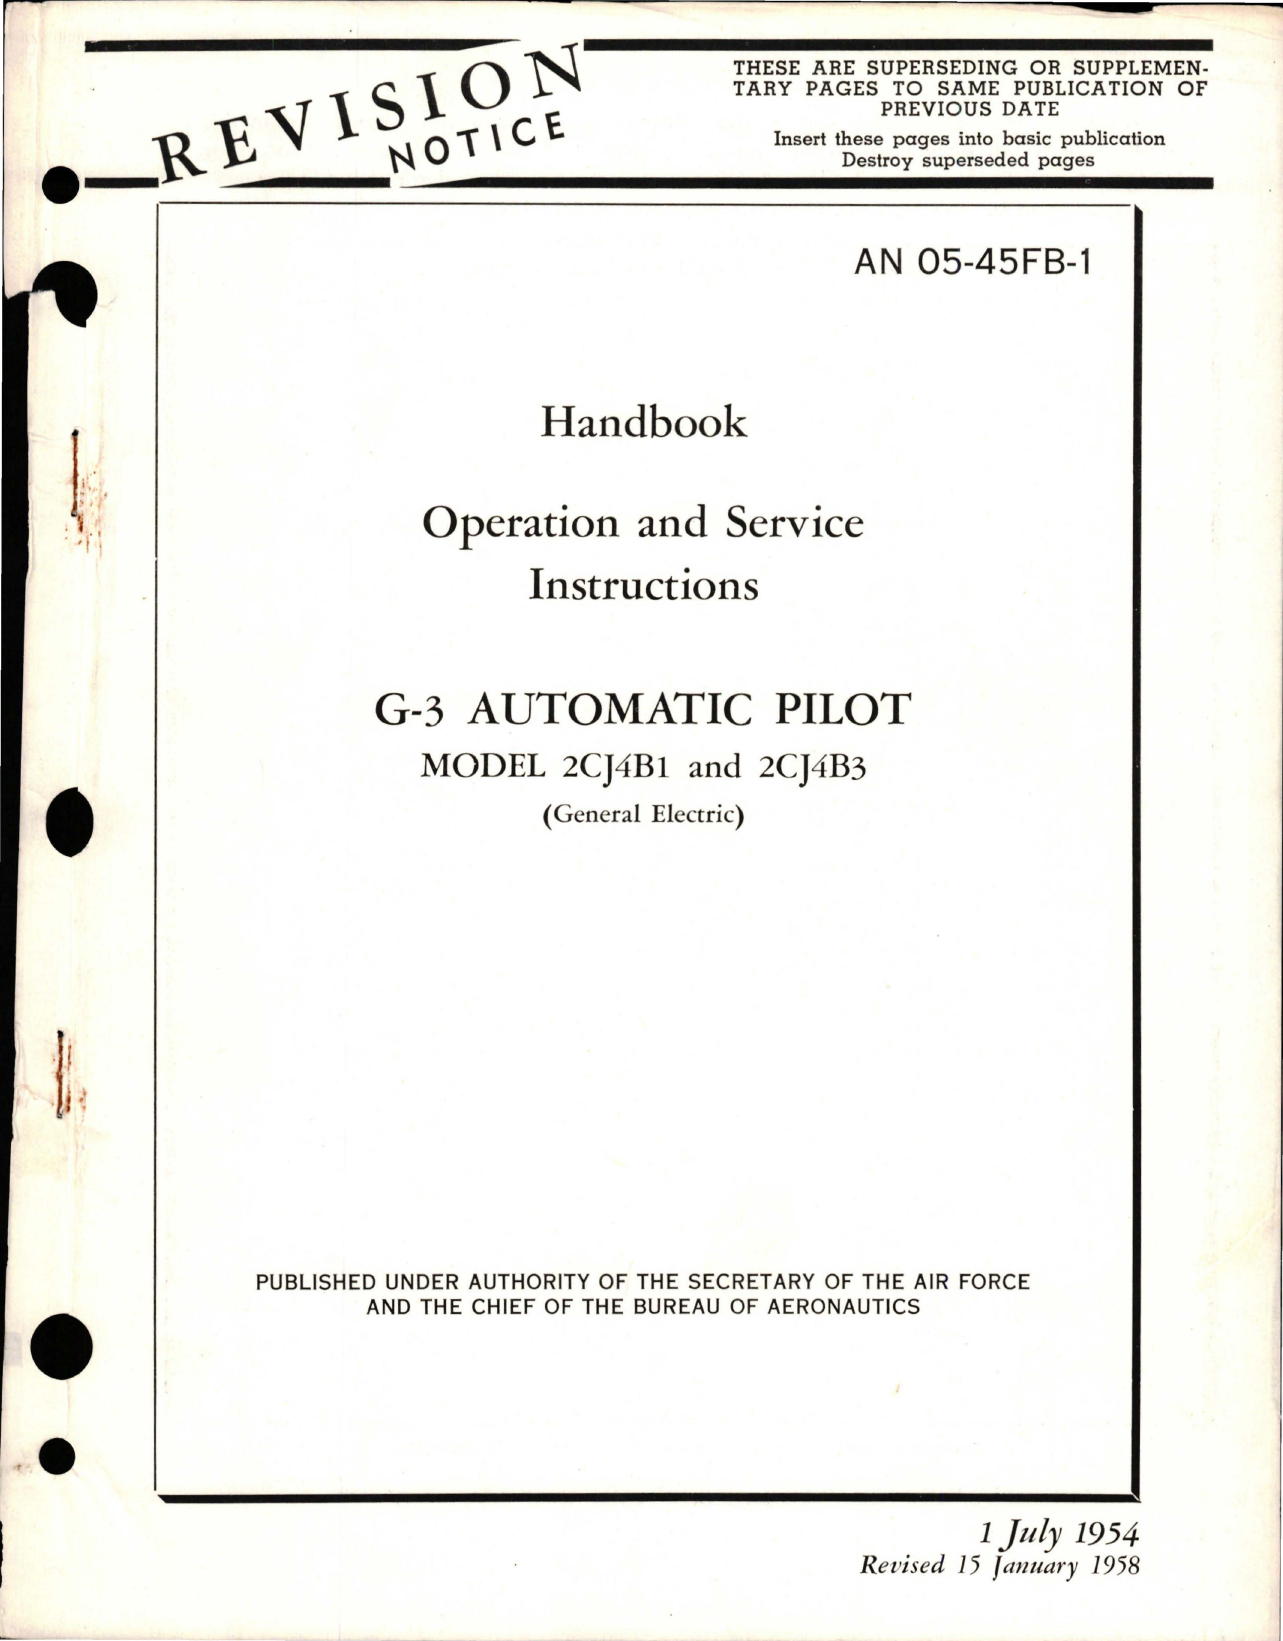 Sample page 1 from AirCorps Library document: Operation and Service Instructions for G-3 Automatic Pilot - Model 2CJ4B1 and 2CJ4B3